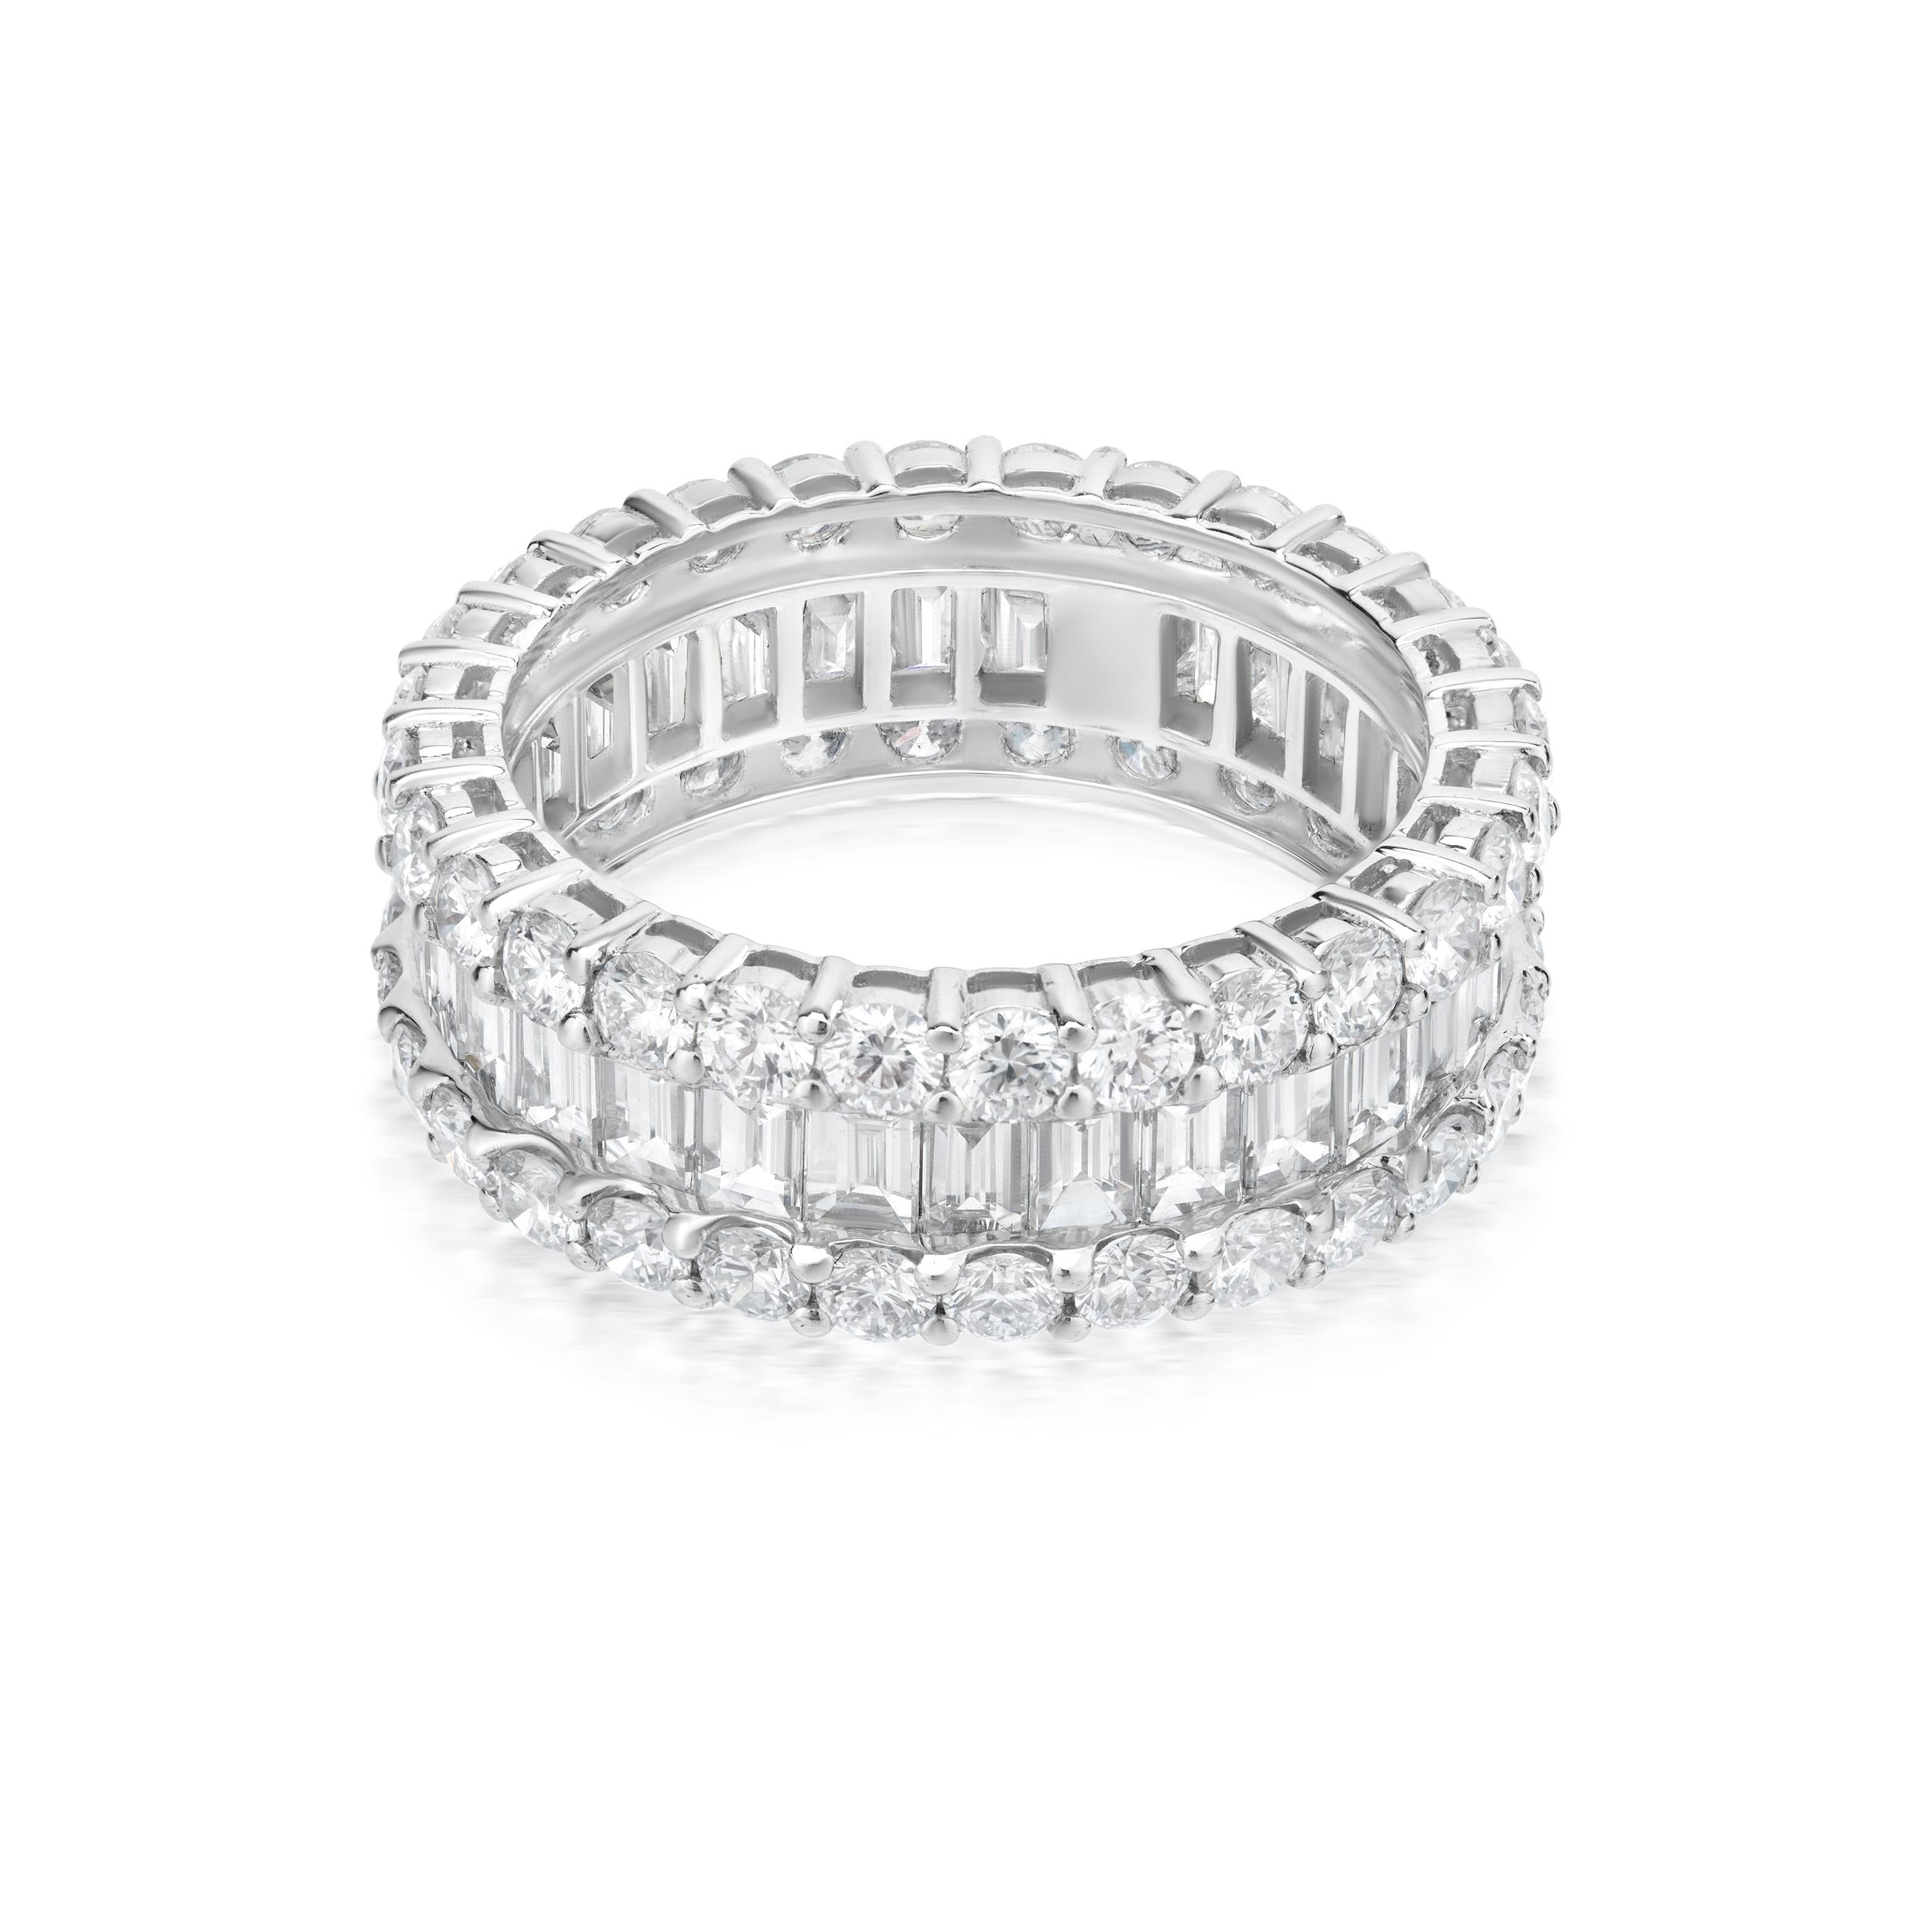 Baguette Cut Nigaam 5.4 Carat T.W Baguette and Round Diamond Band Ring in 18k White Gold